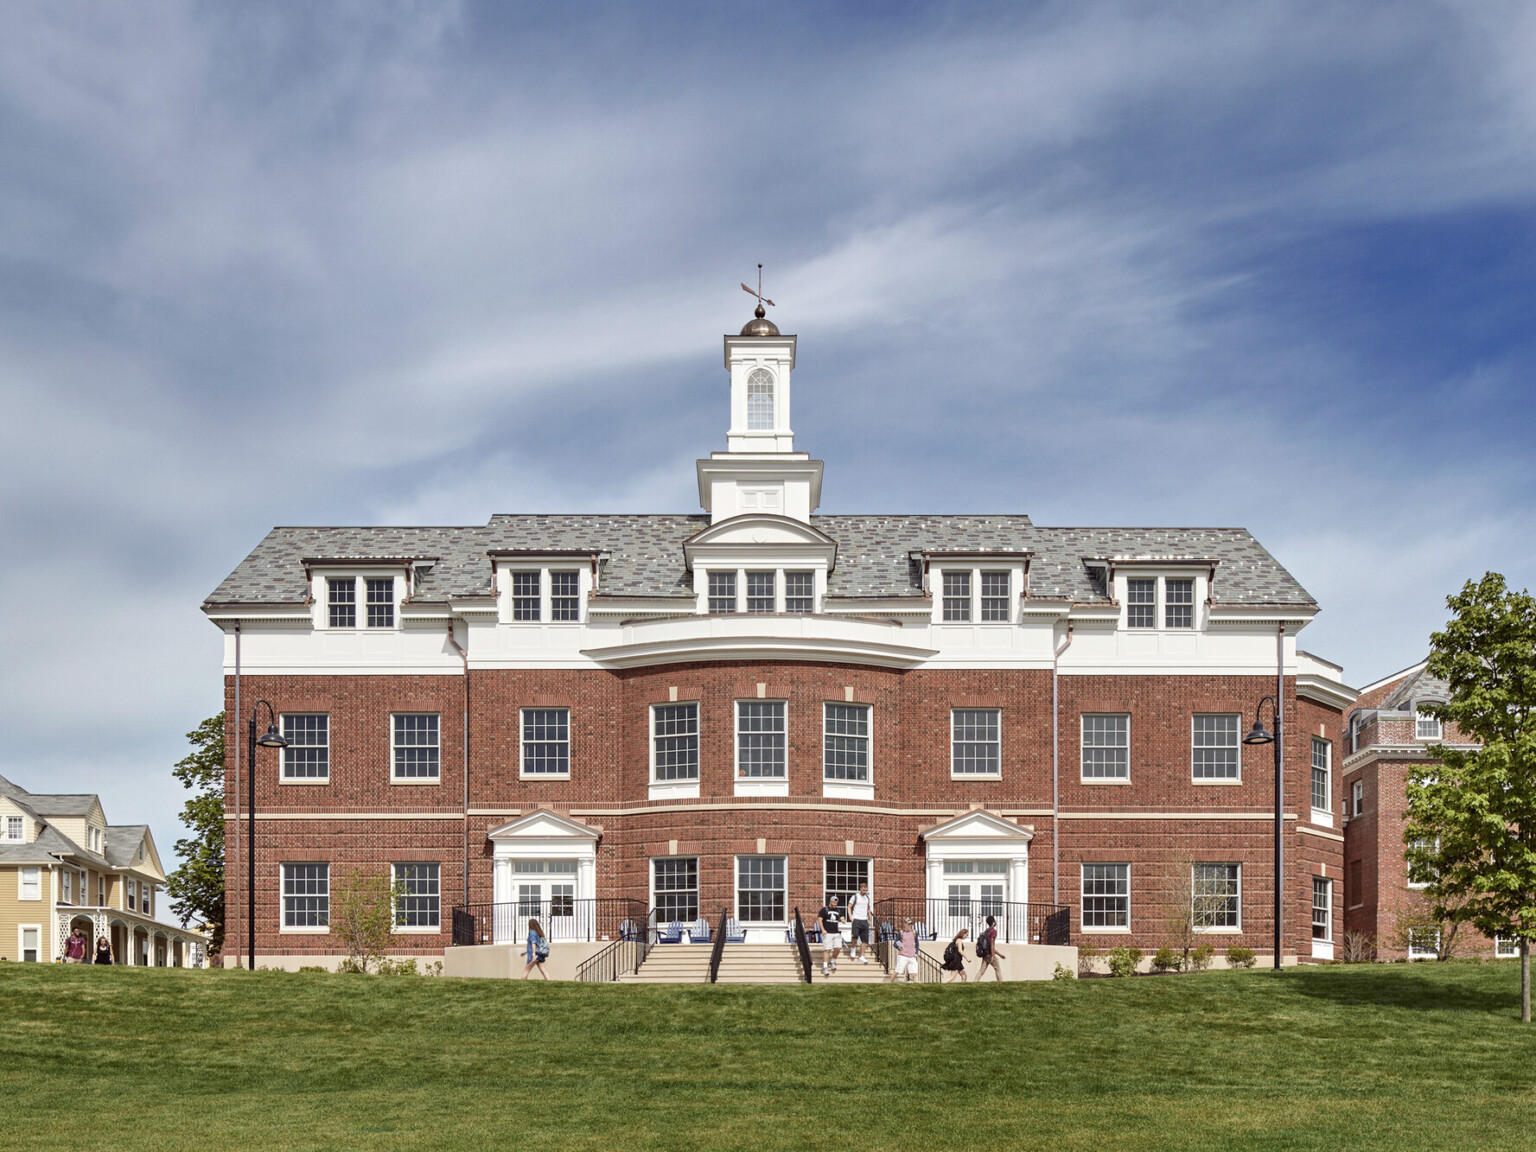 Exterior of Georgian Colonial Revival three story brick and white boarding school student center with white central bell tower